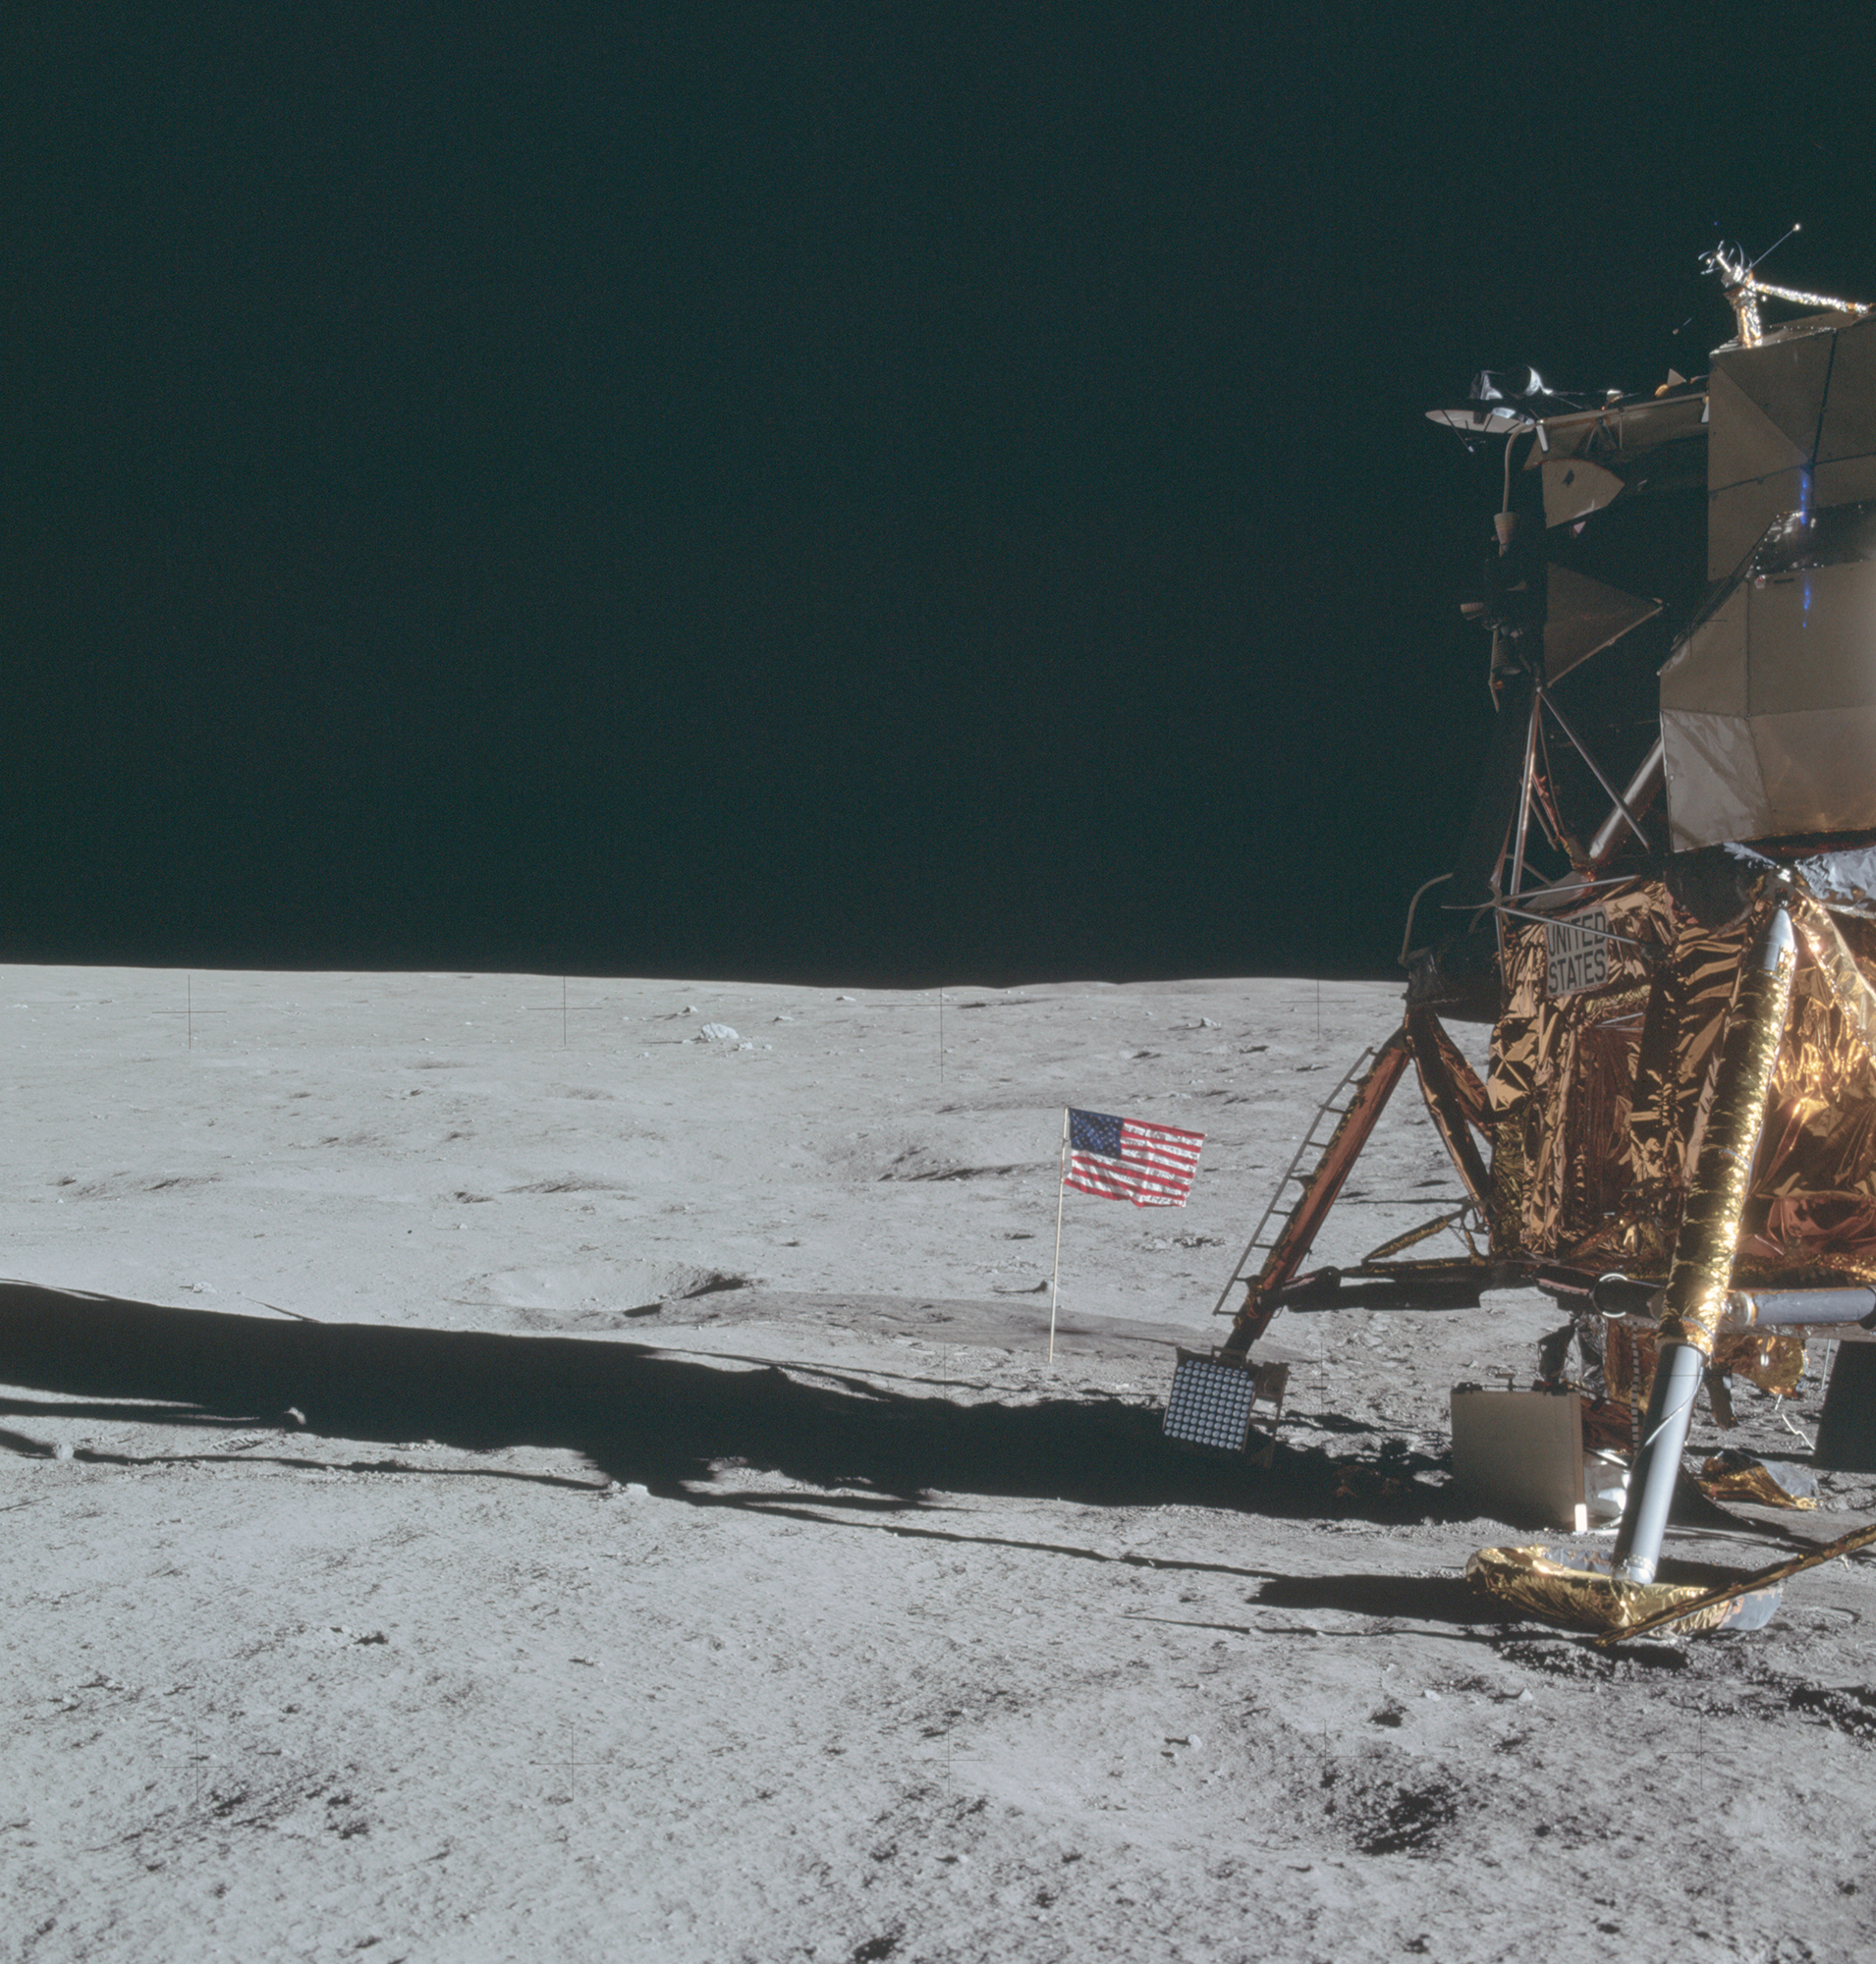 apollo-14-full-view-of-the-left-rear-quadrant-of-the-spacecraft-on-moon.jpg